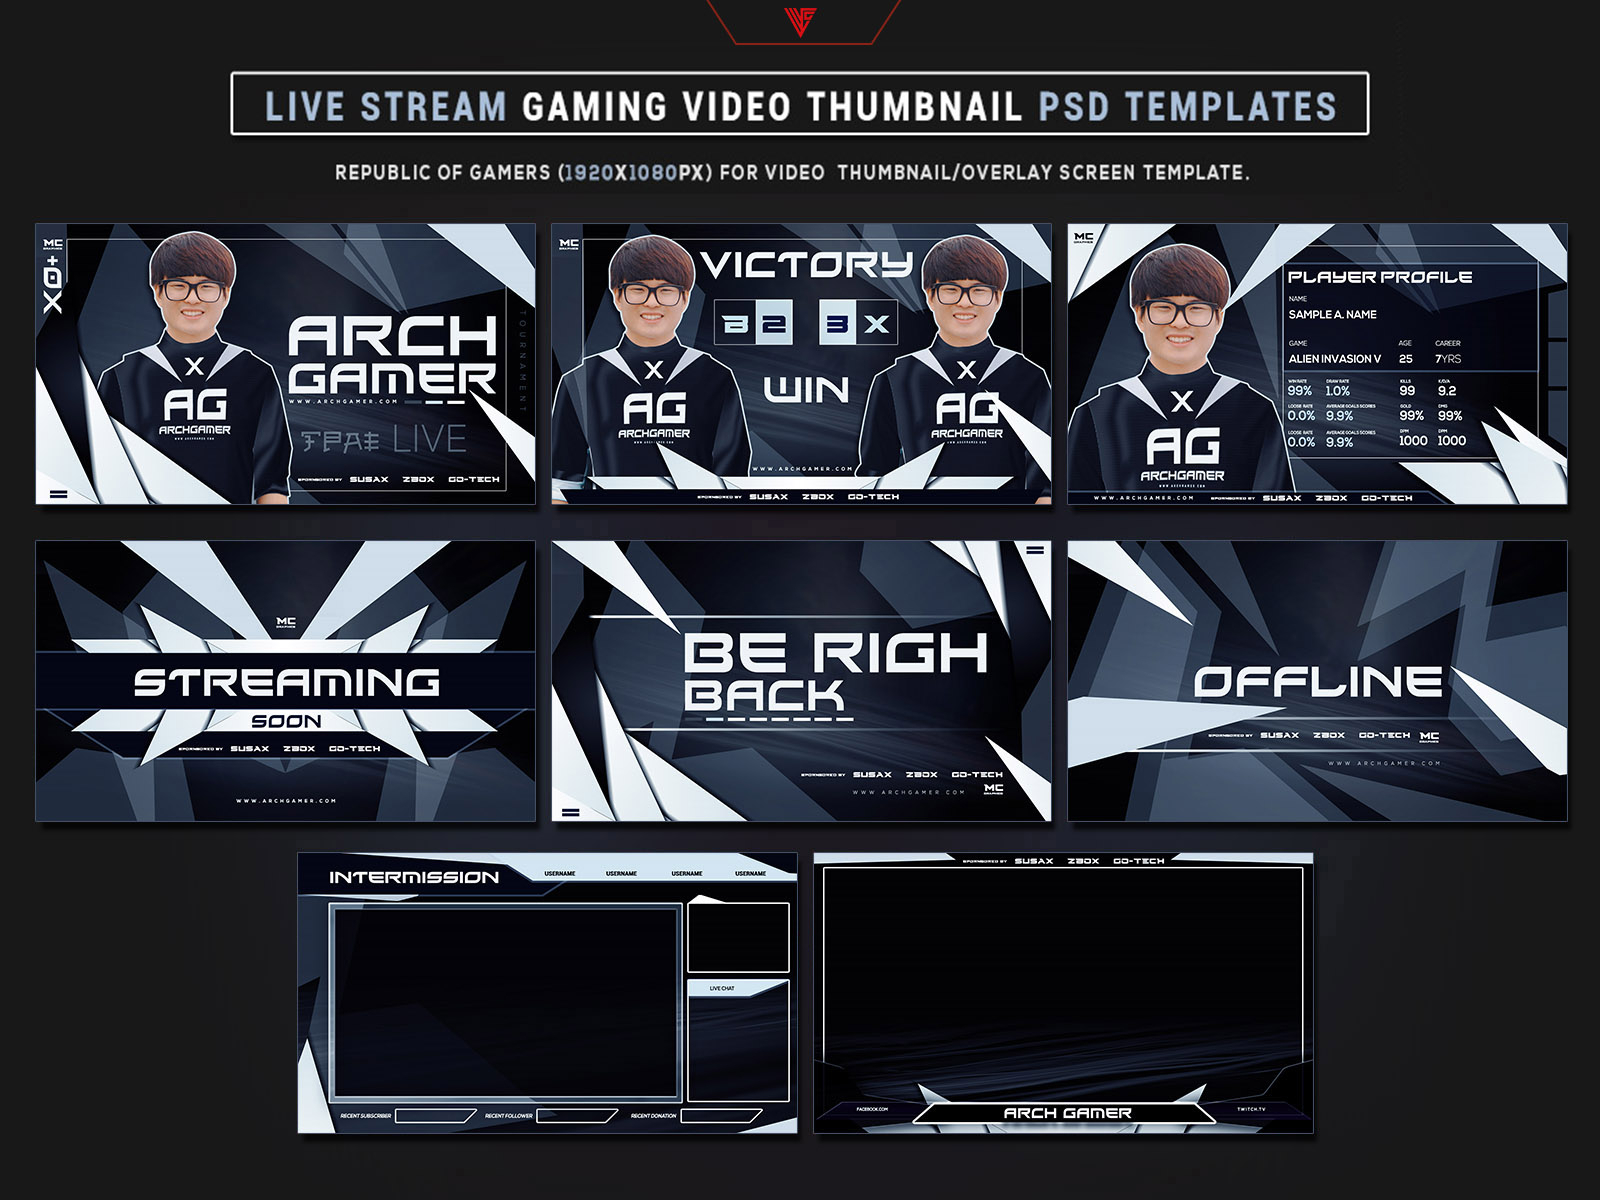 Gamer Esport Team Live Stream Gaming Video Photoshop Templates by mcgraphics on Dribbble